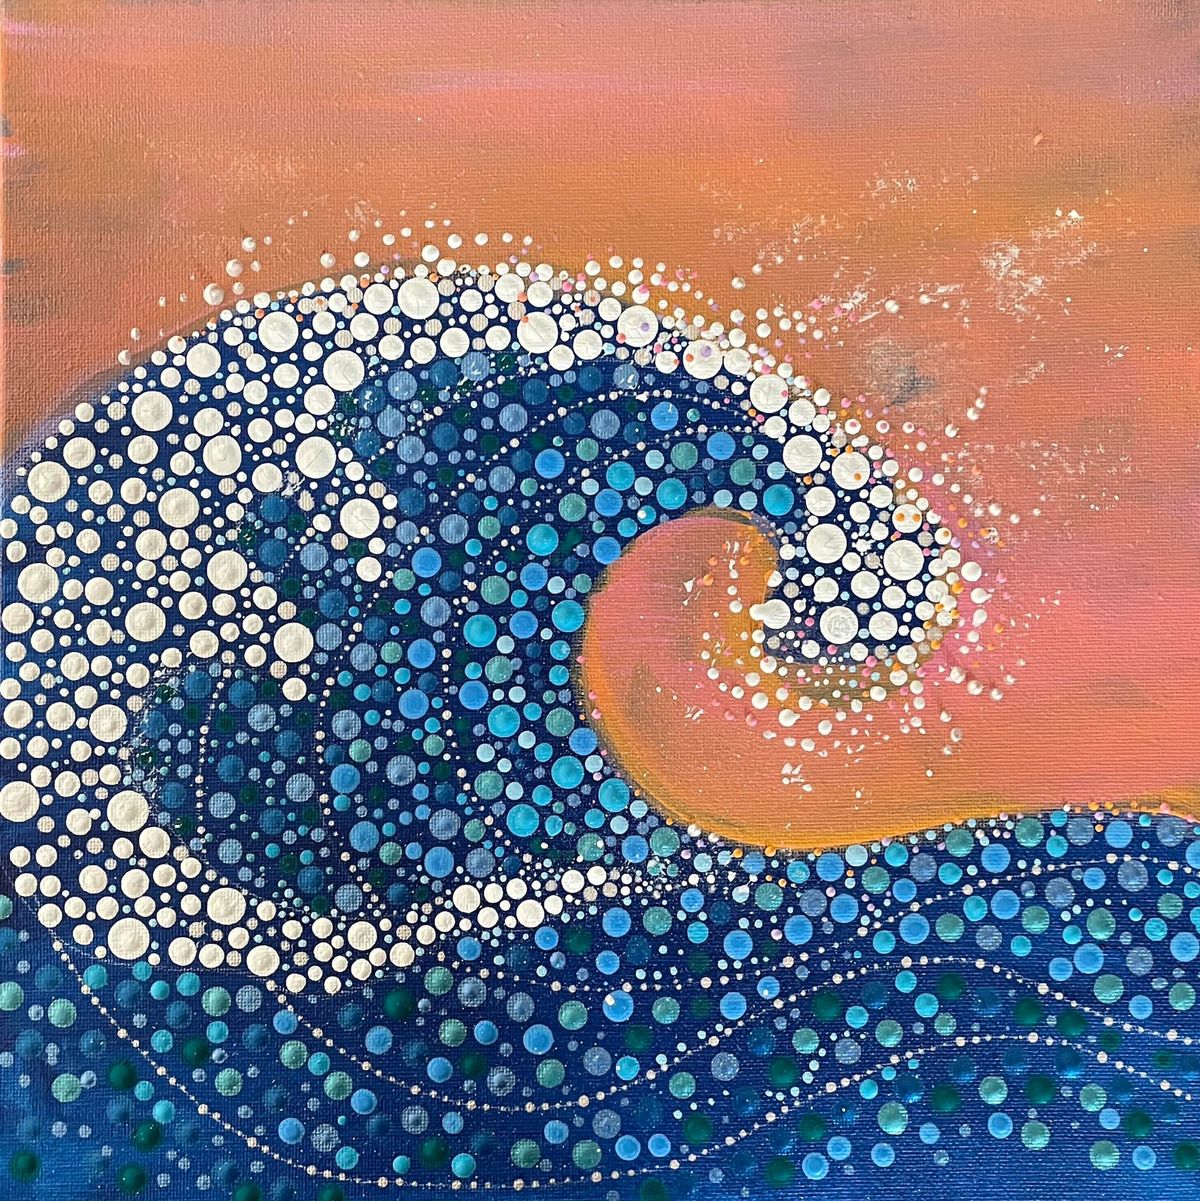 Dive into the Art of Dotting: Cresting Ocean Waves Class!